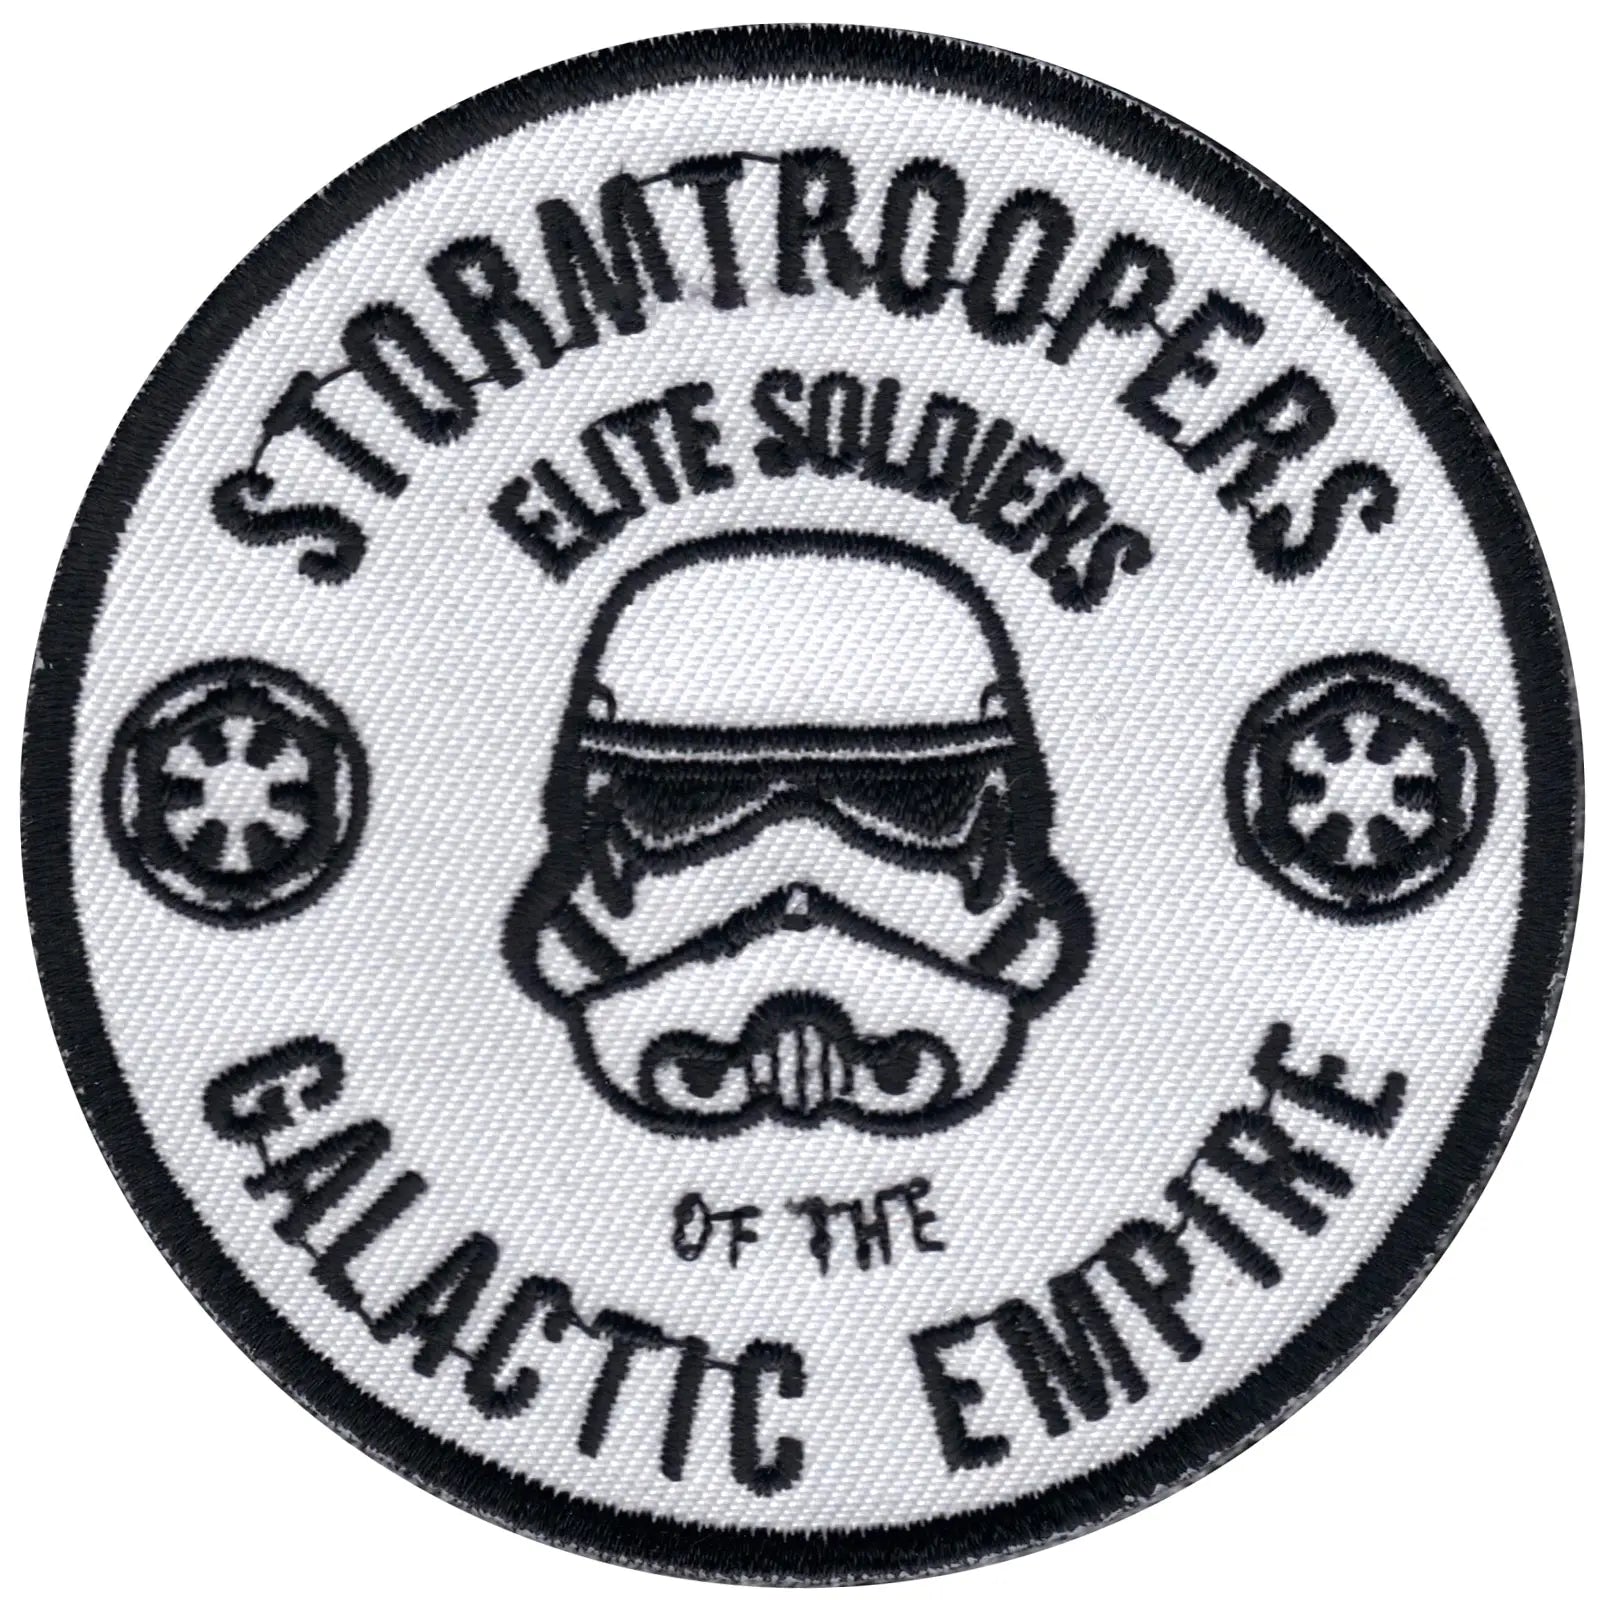 Official Star Wars Storm Troopers Embroidered Iron On Patch